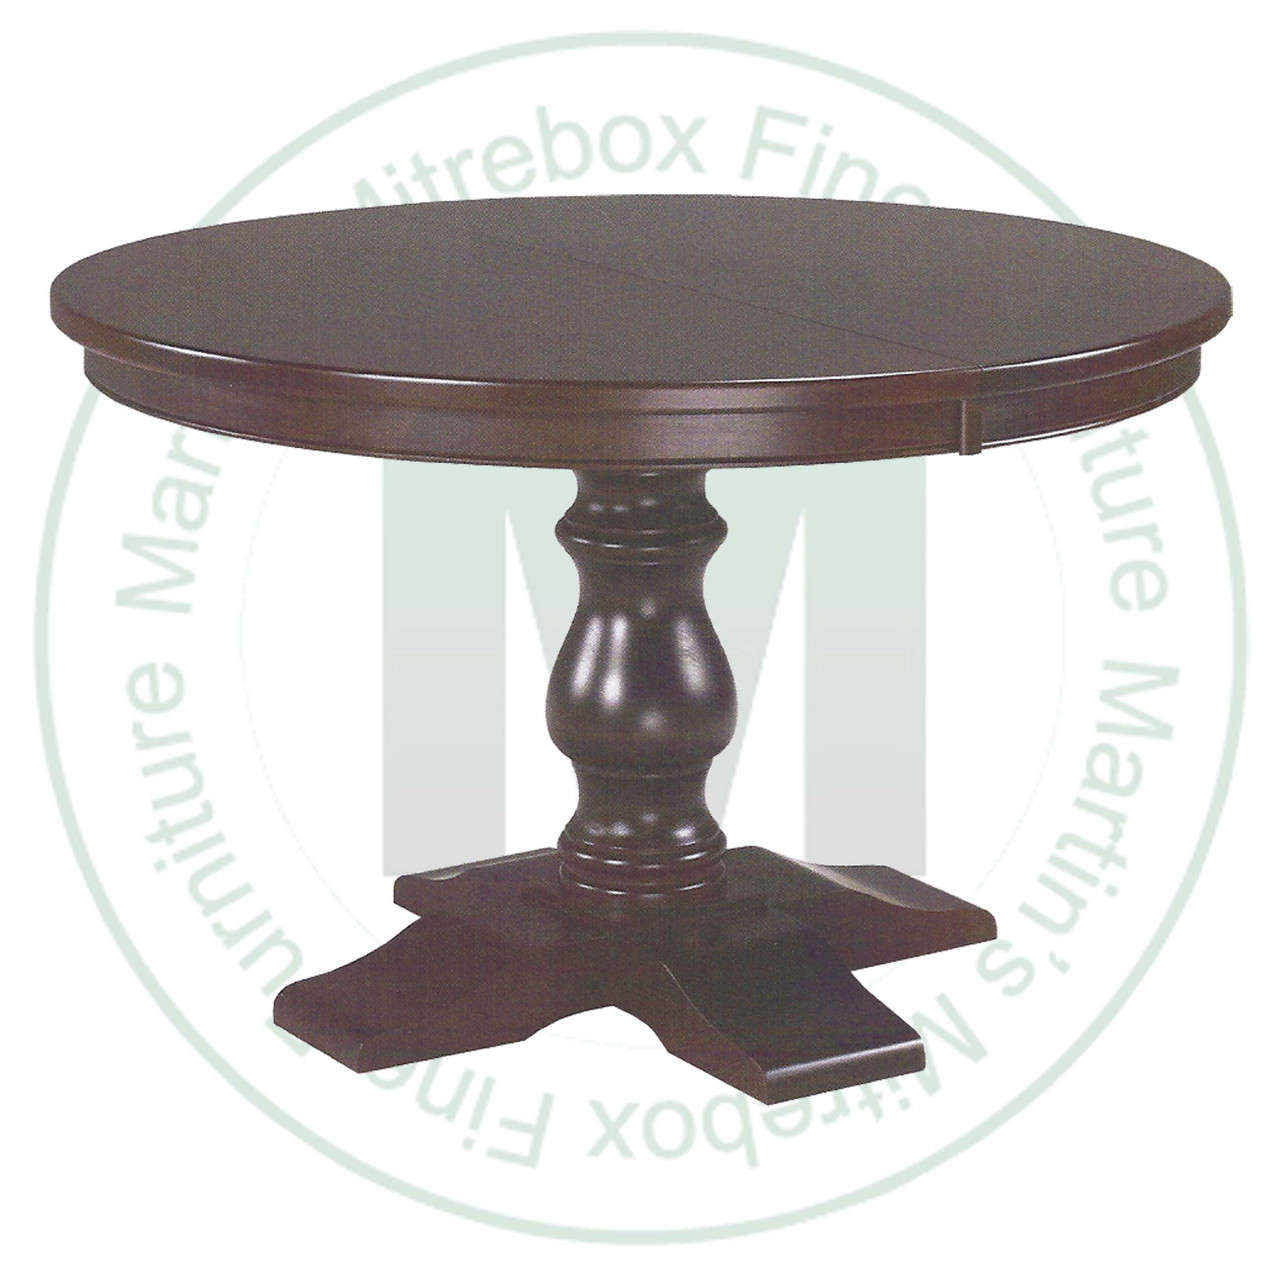 Oak Savannah Single Pedestal Table 48''D x 48''W x 30''H With 2 - 12'' Leaves Table. Table Has 1'' Thick Top.